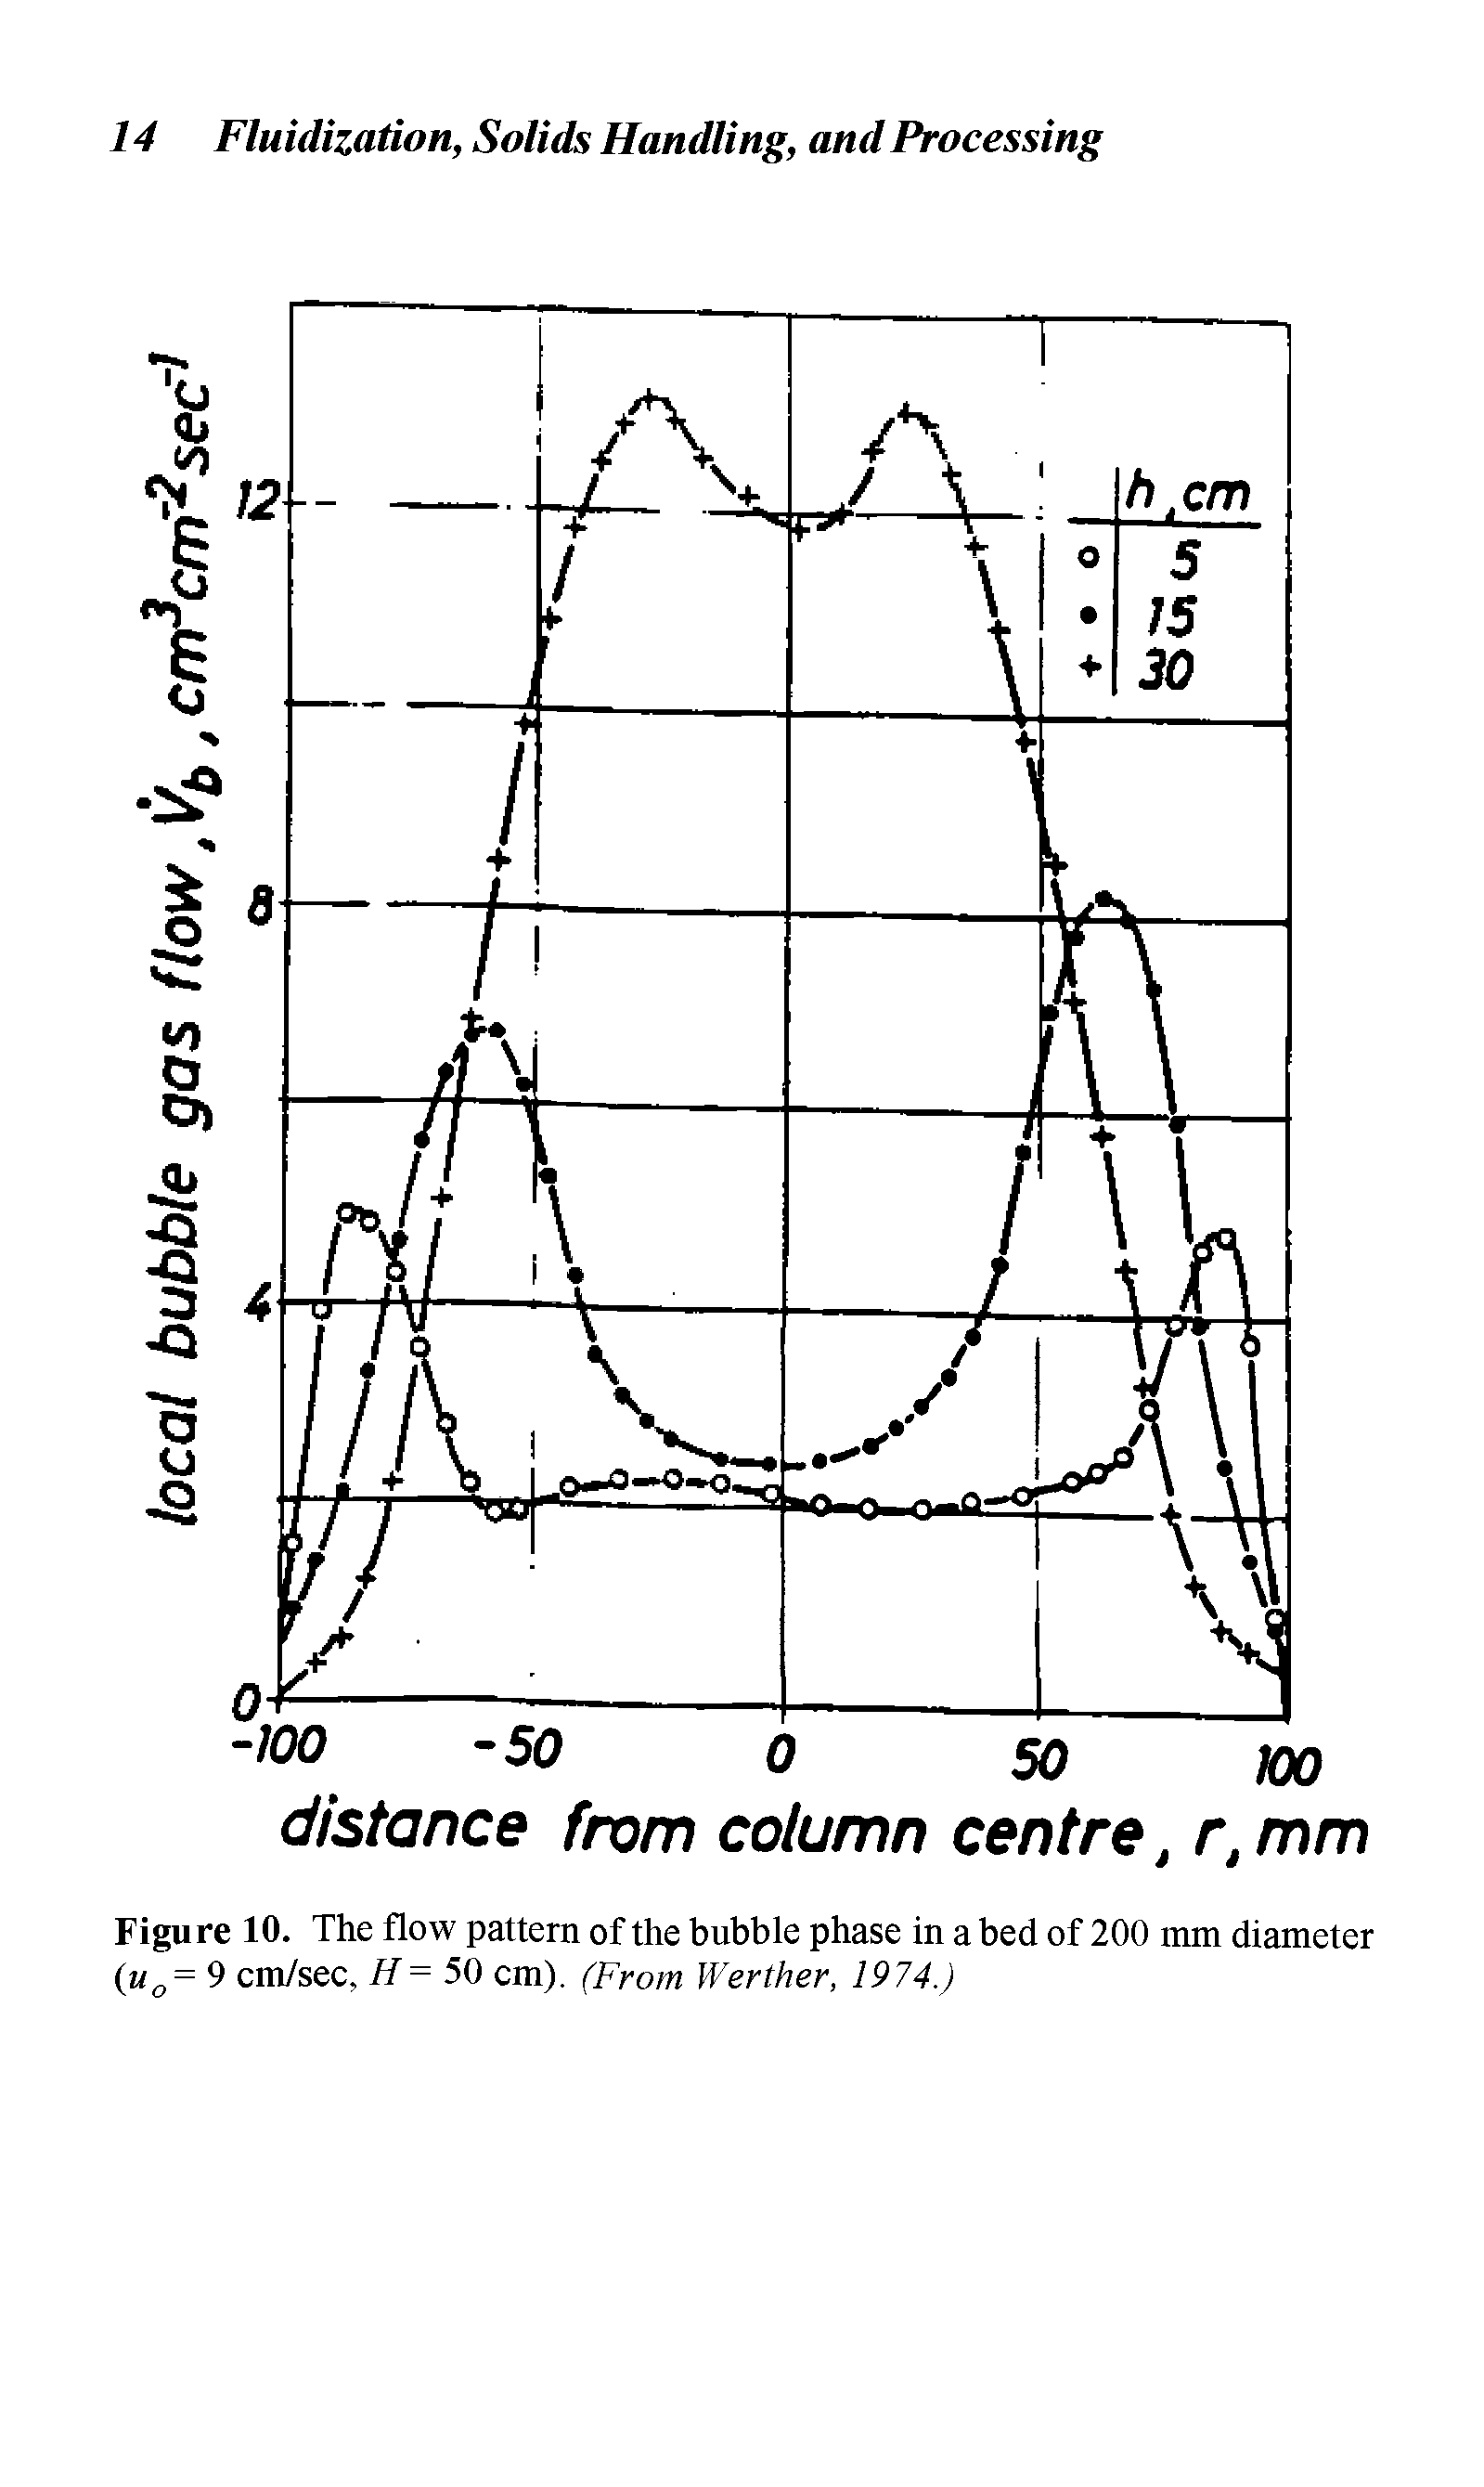 Figure 10. The flow pattern of the bubble phase in a bed of 200 mm diameter (uQ = 9 cm/sec, H= 50 cm). (From Werther, 1974.)...